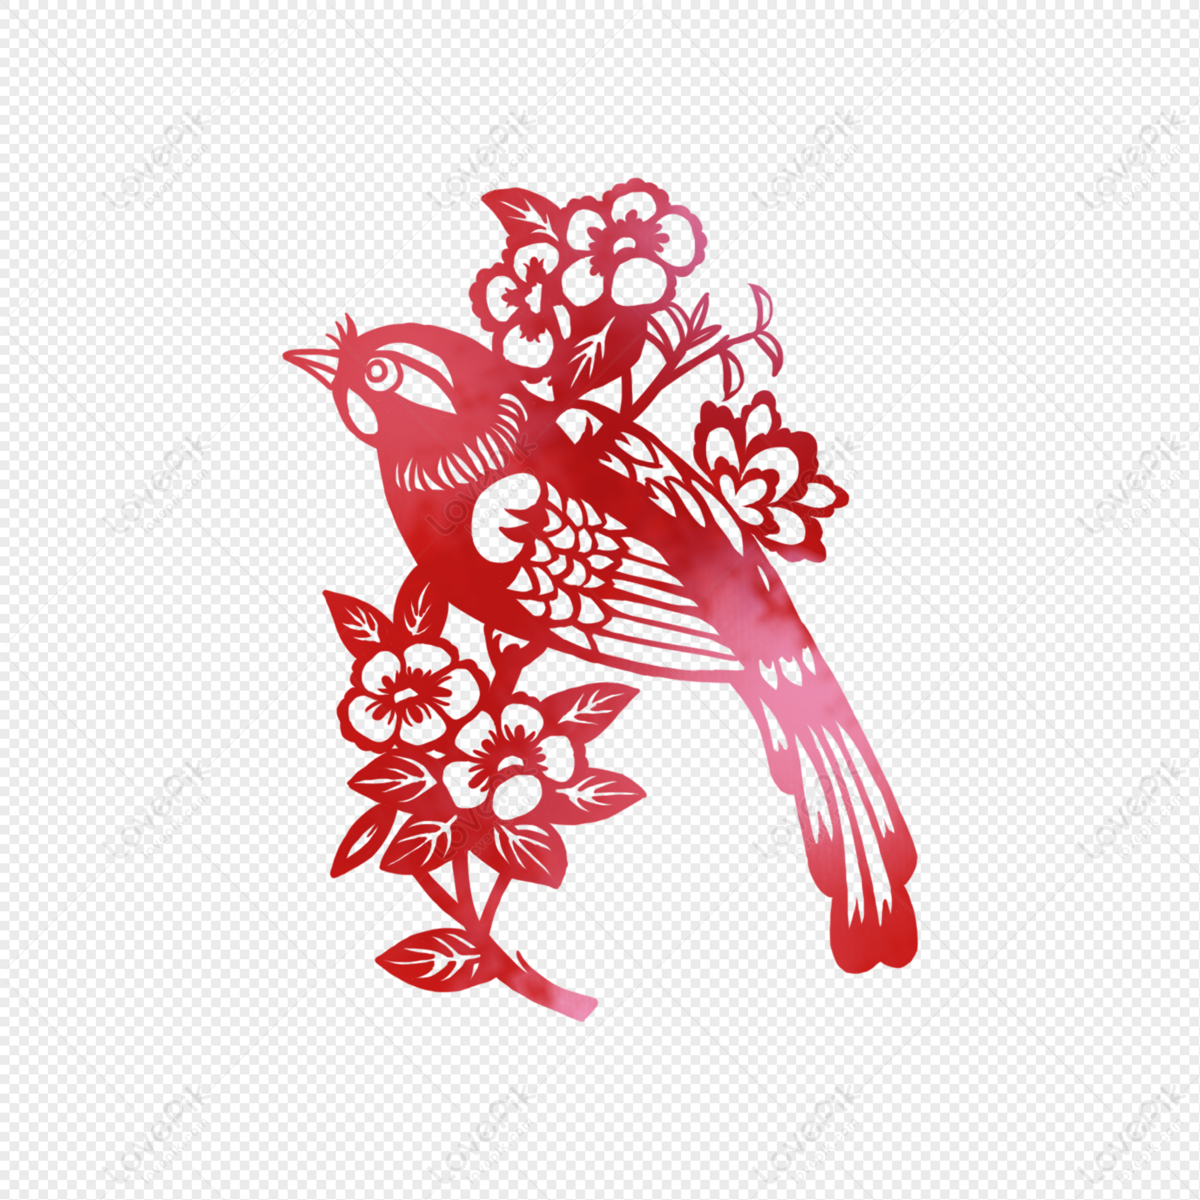 Bird Windowpane Paper Cut PNG Hd Transparent Image And Clipart Image For  Free Download - Lovepik | 400952874